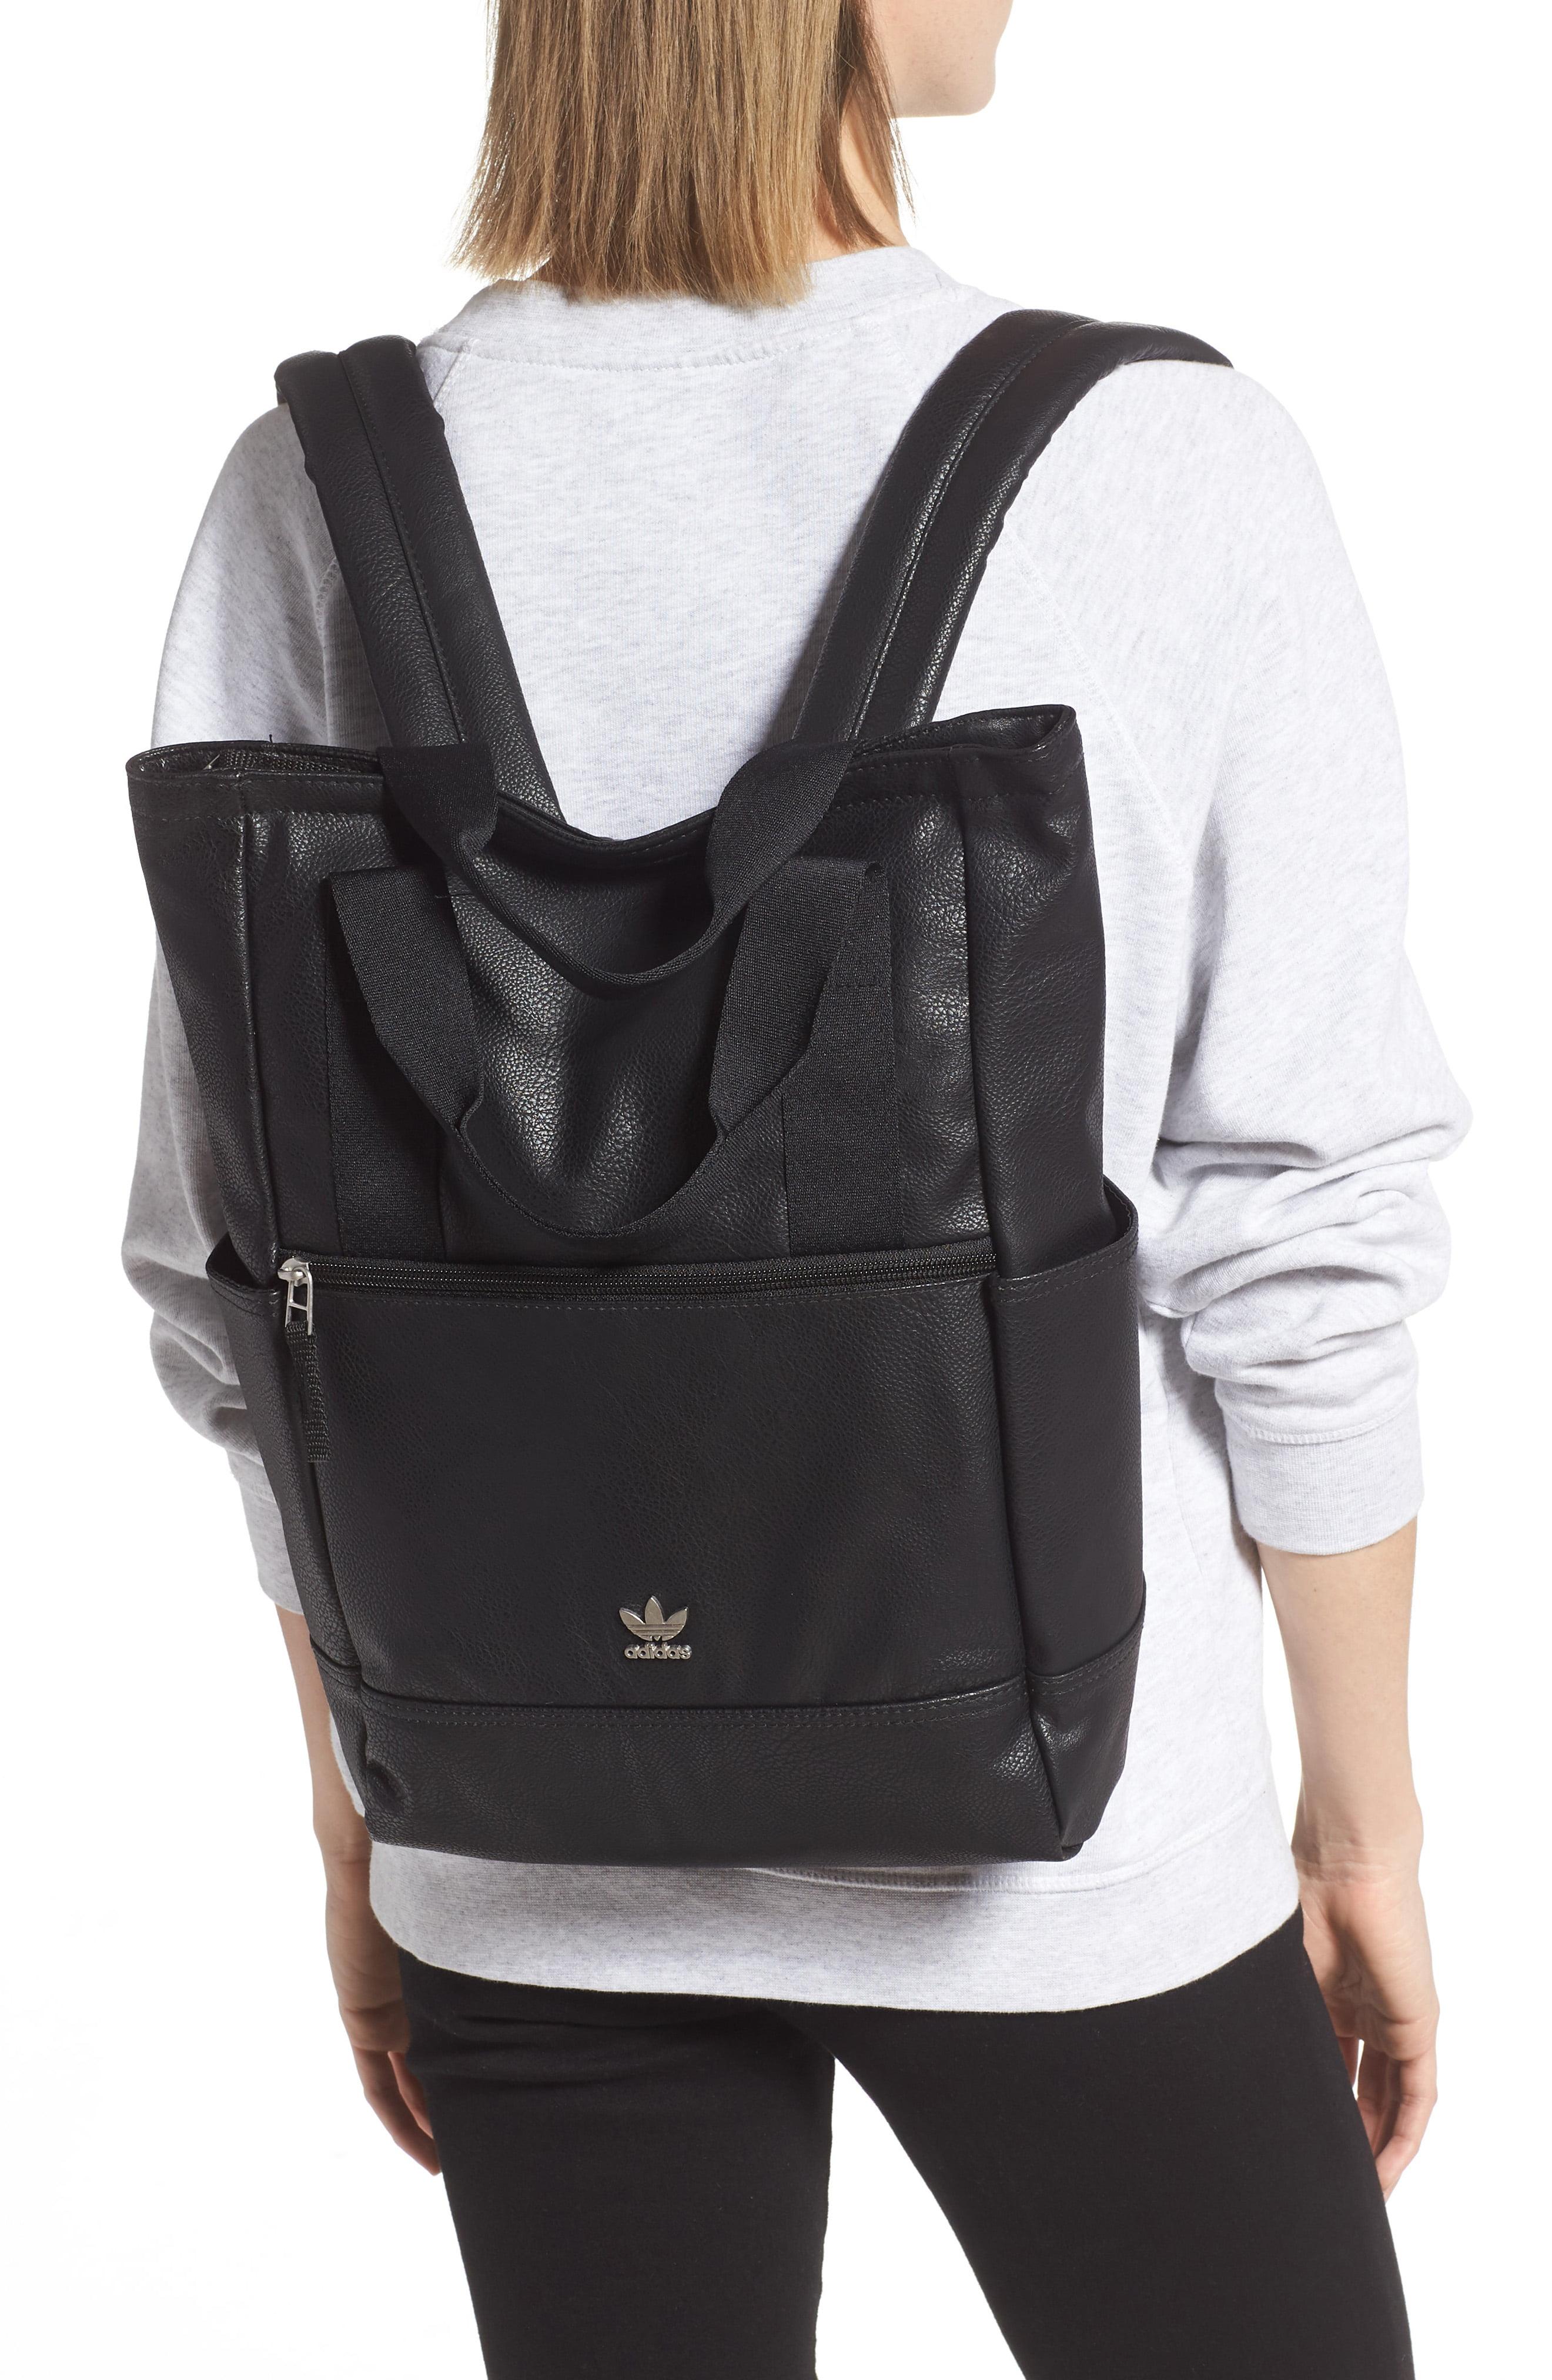 Adidas Tote 3 Premium Backpack on Sale, SAVE 32% - aveclumiere.com